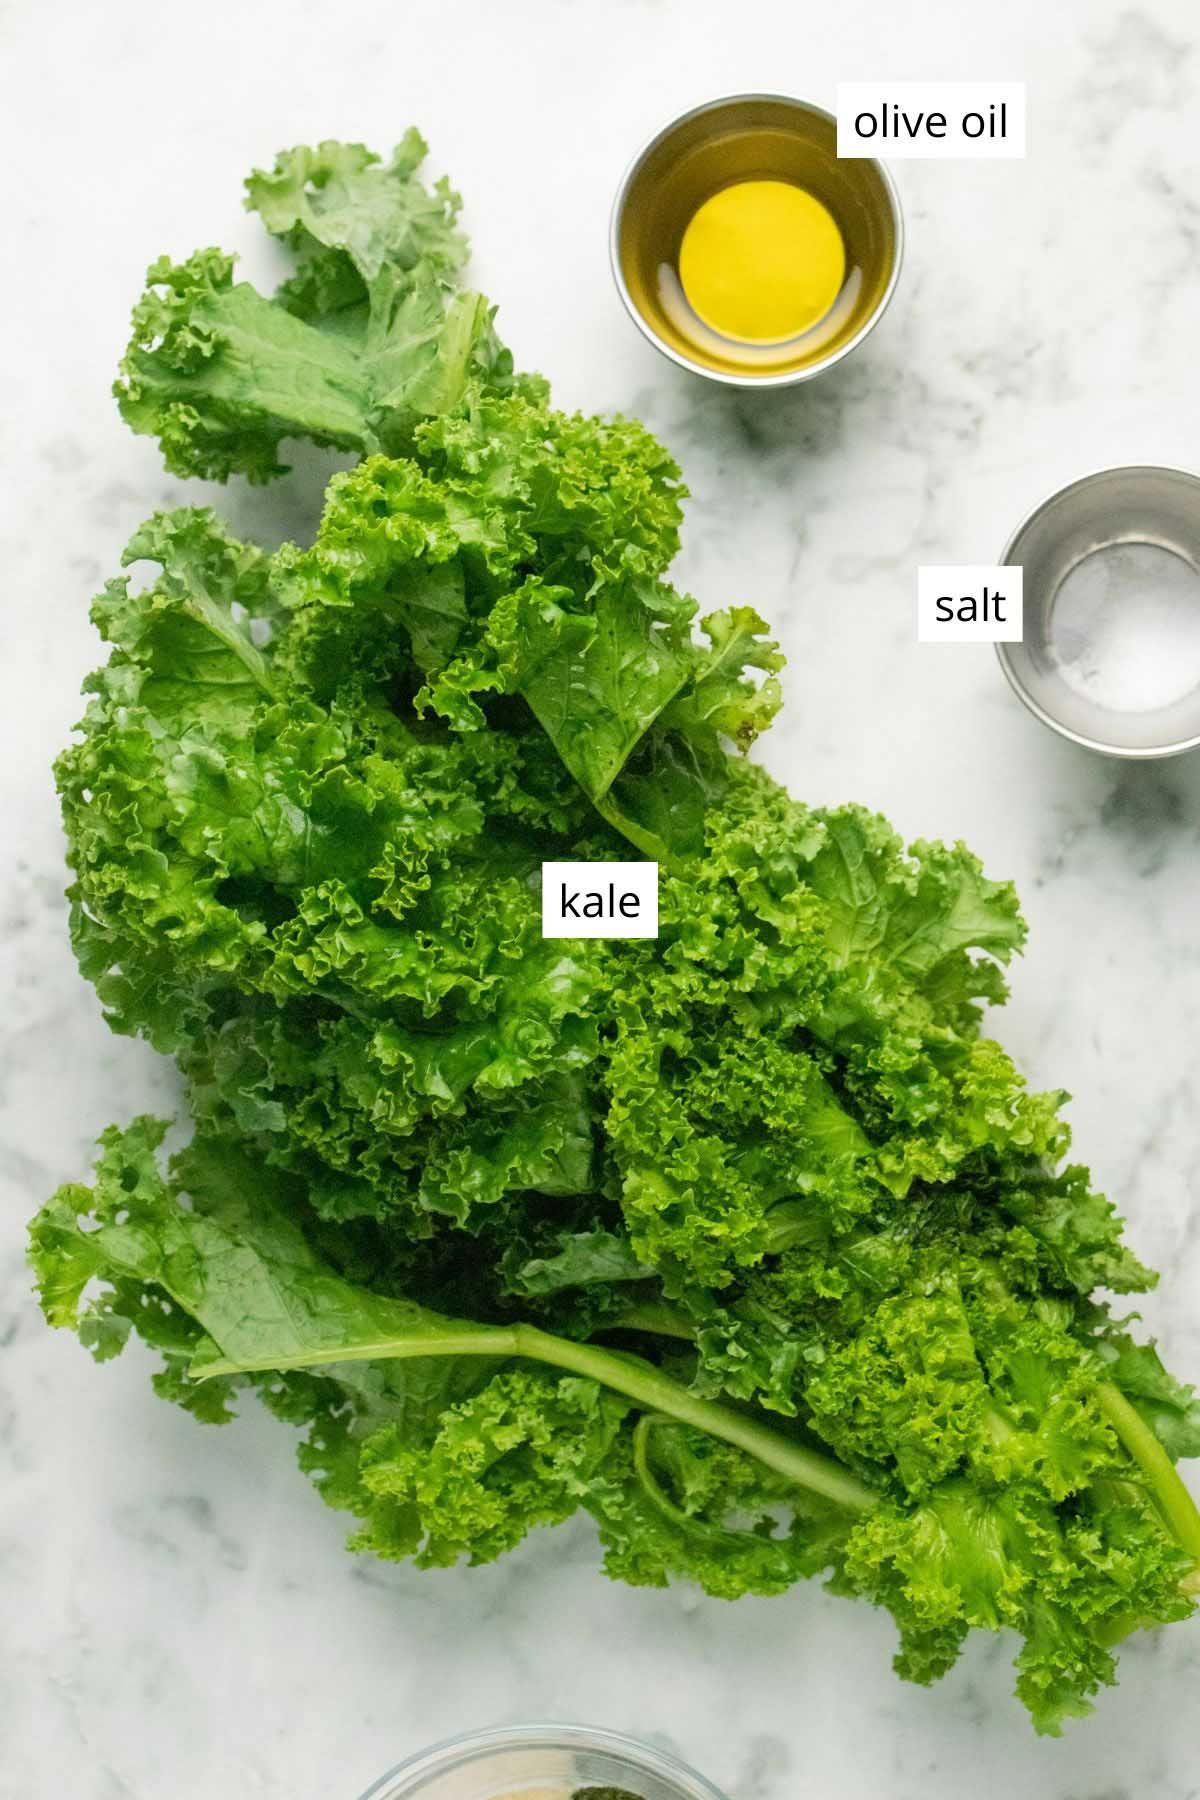 kale, olive oil, and salt on a marble table with text labels on each one